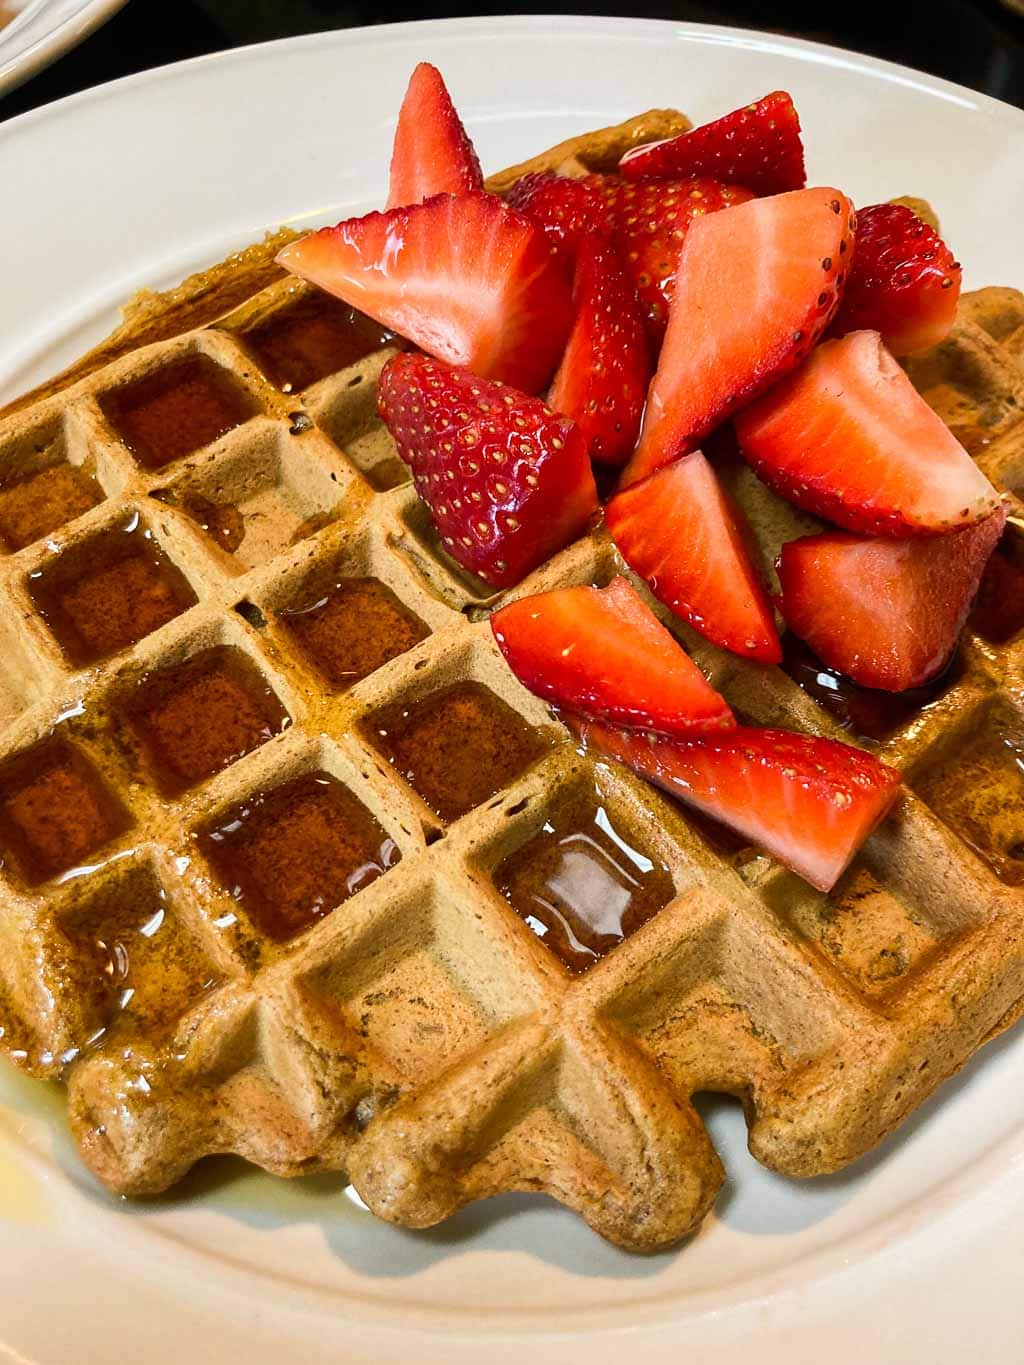 Pumpkin waffles recipe with strawberries and maple syrup